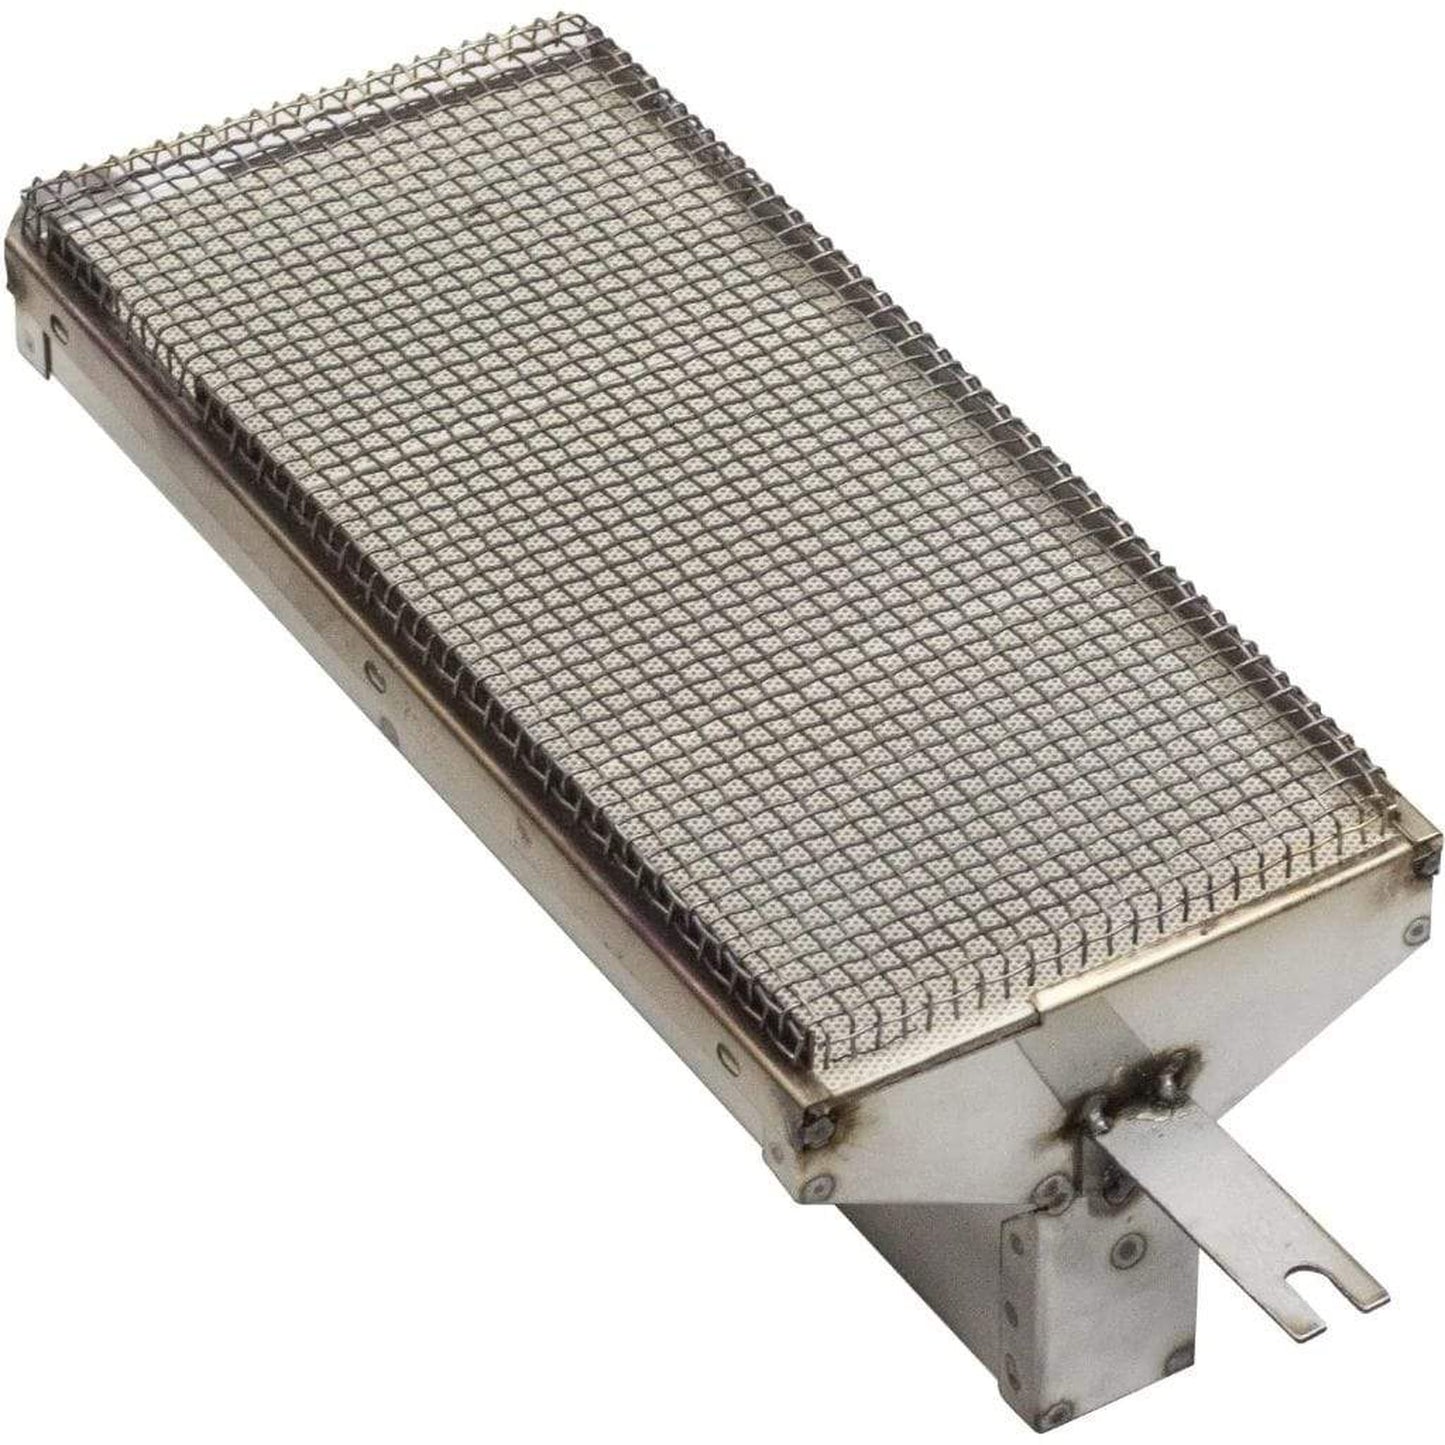 American Made Grills by Summerset Drop-In Infrared Sear Burner